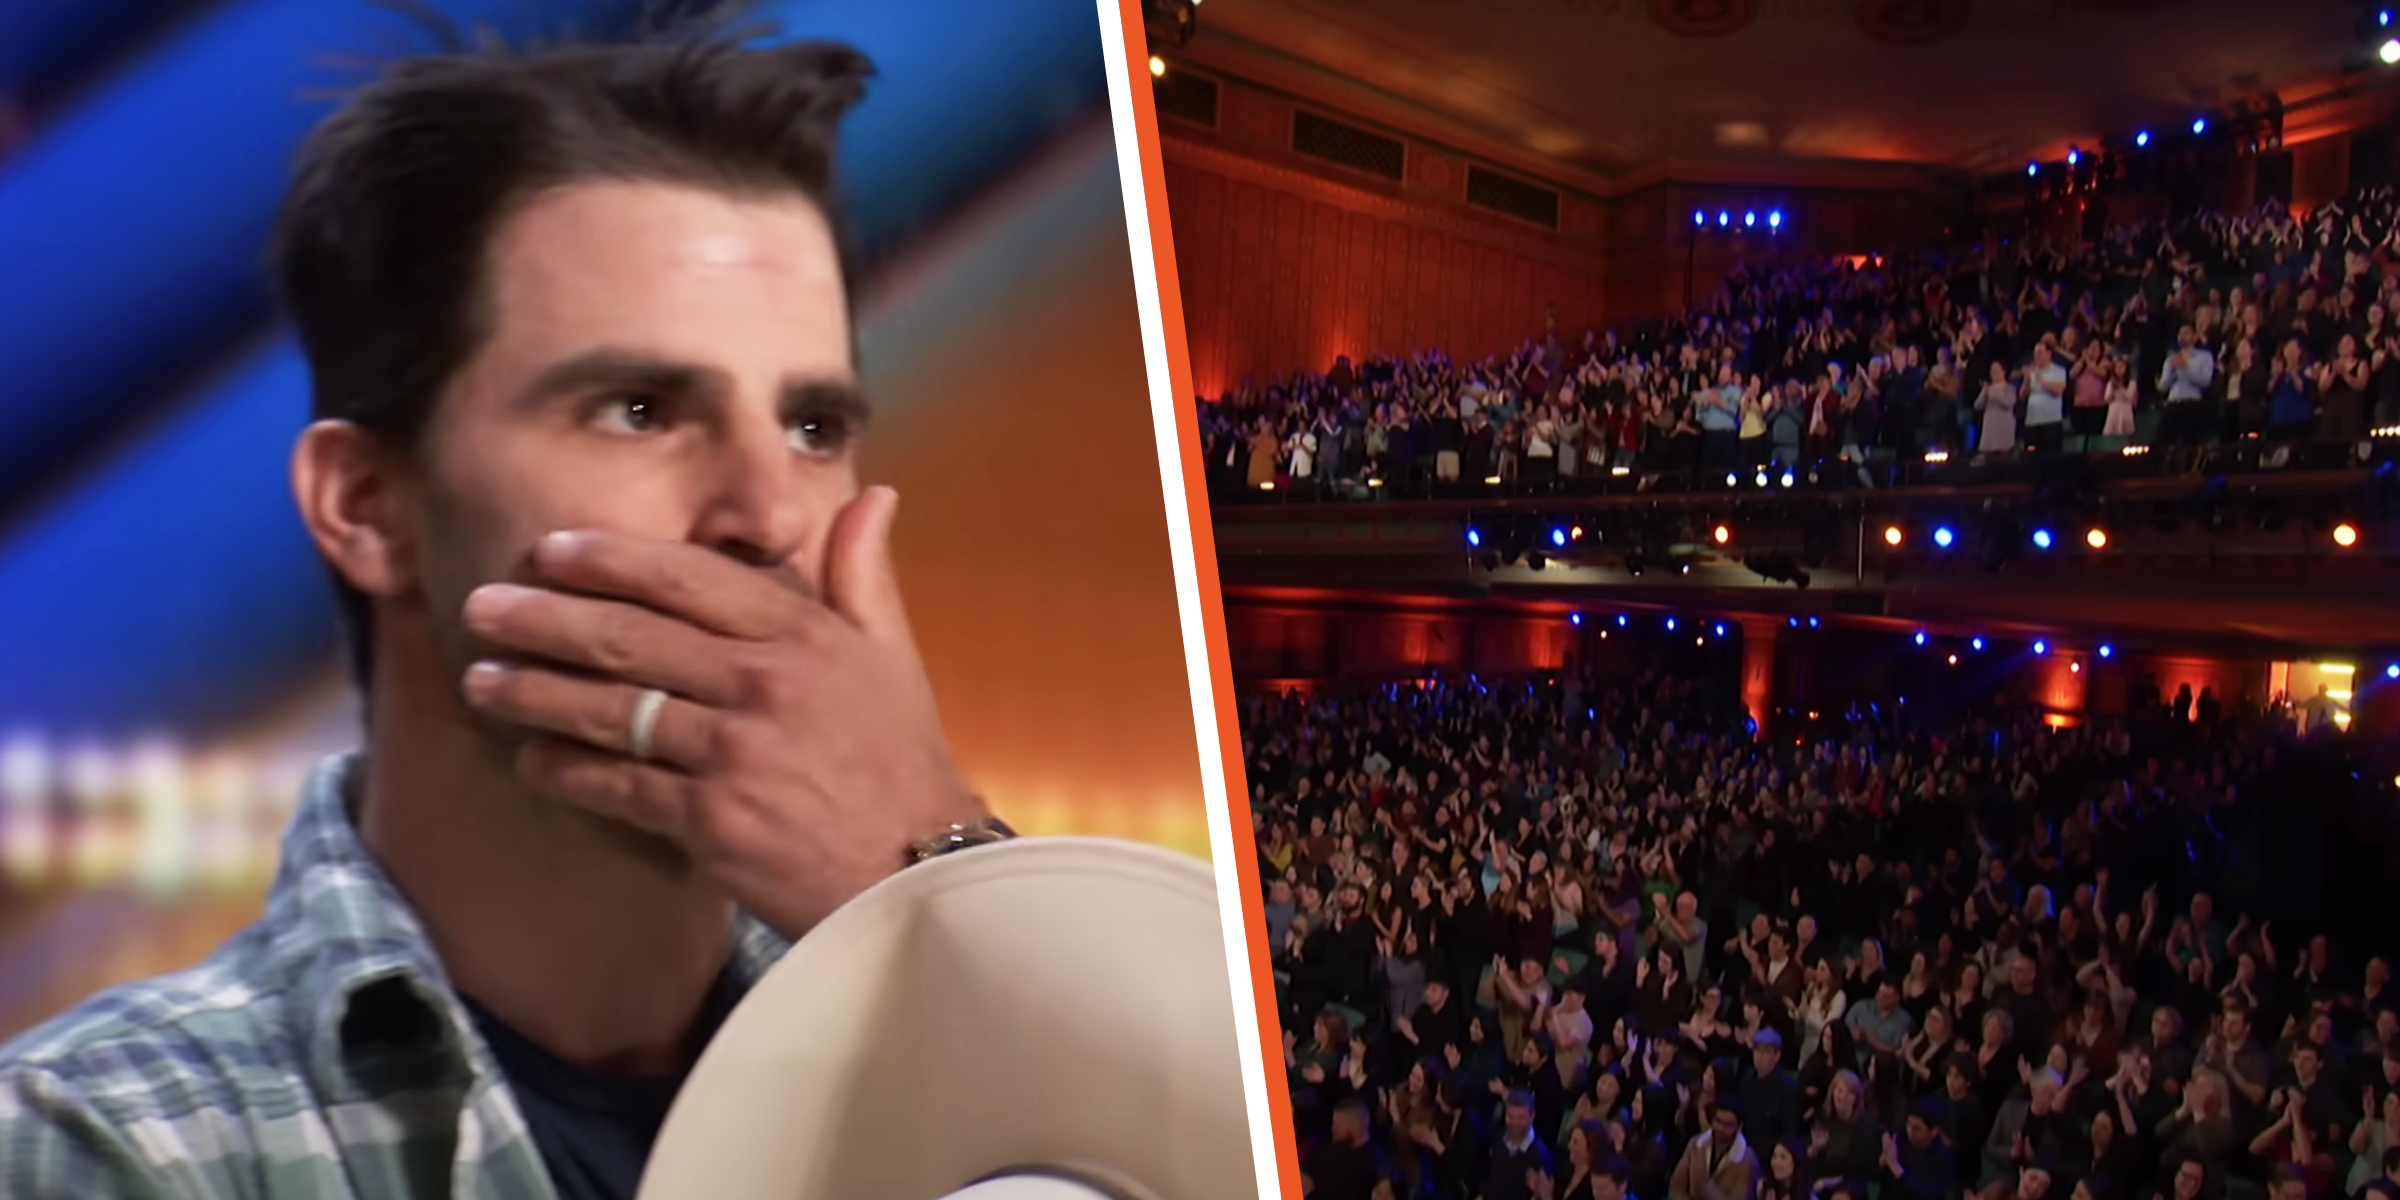 Mitch Rossell, 2023 | America's Got Talent Audience, 2023 | Source: YouTube/America's Got Talent